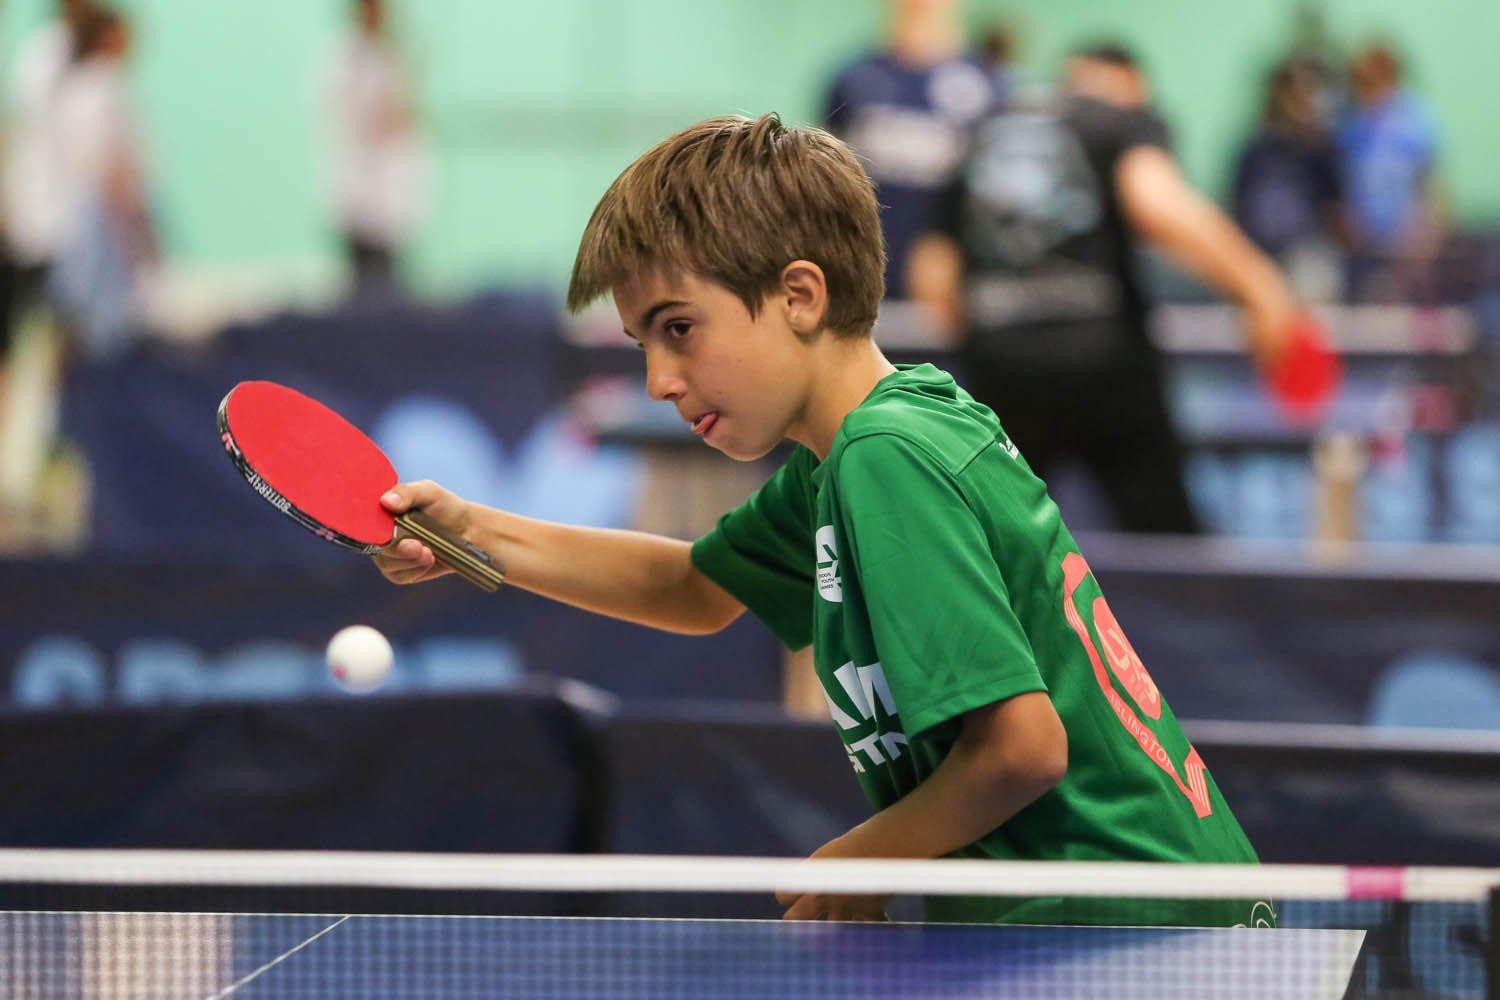 A young boy enthusiastically playing ping pong with a ball, showcasing his skills and passion for the sport.